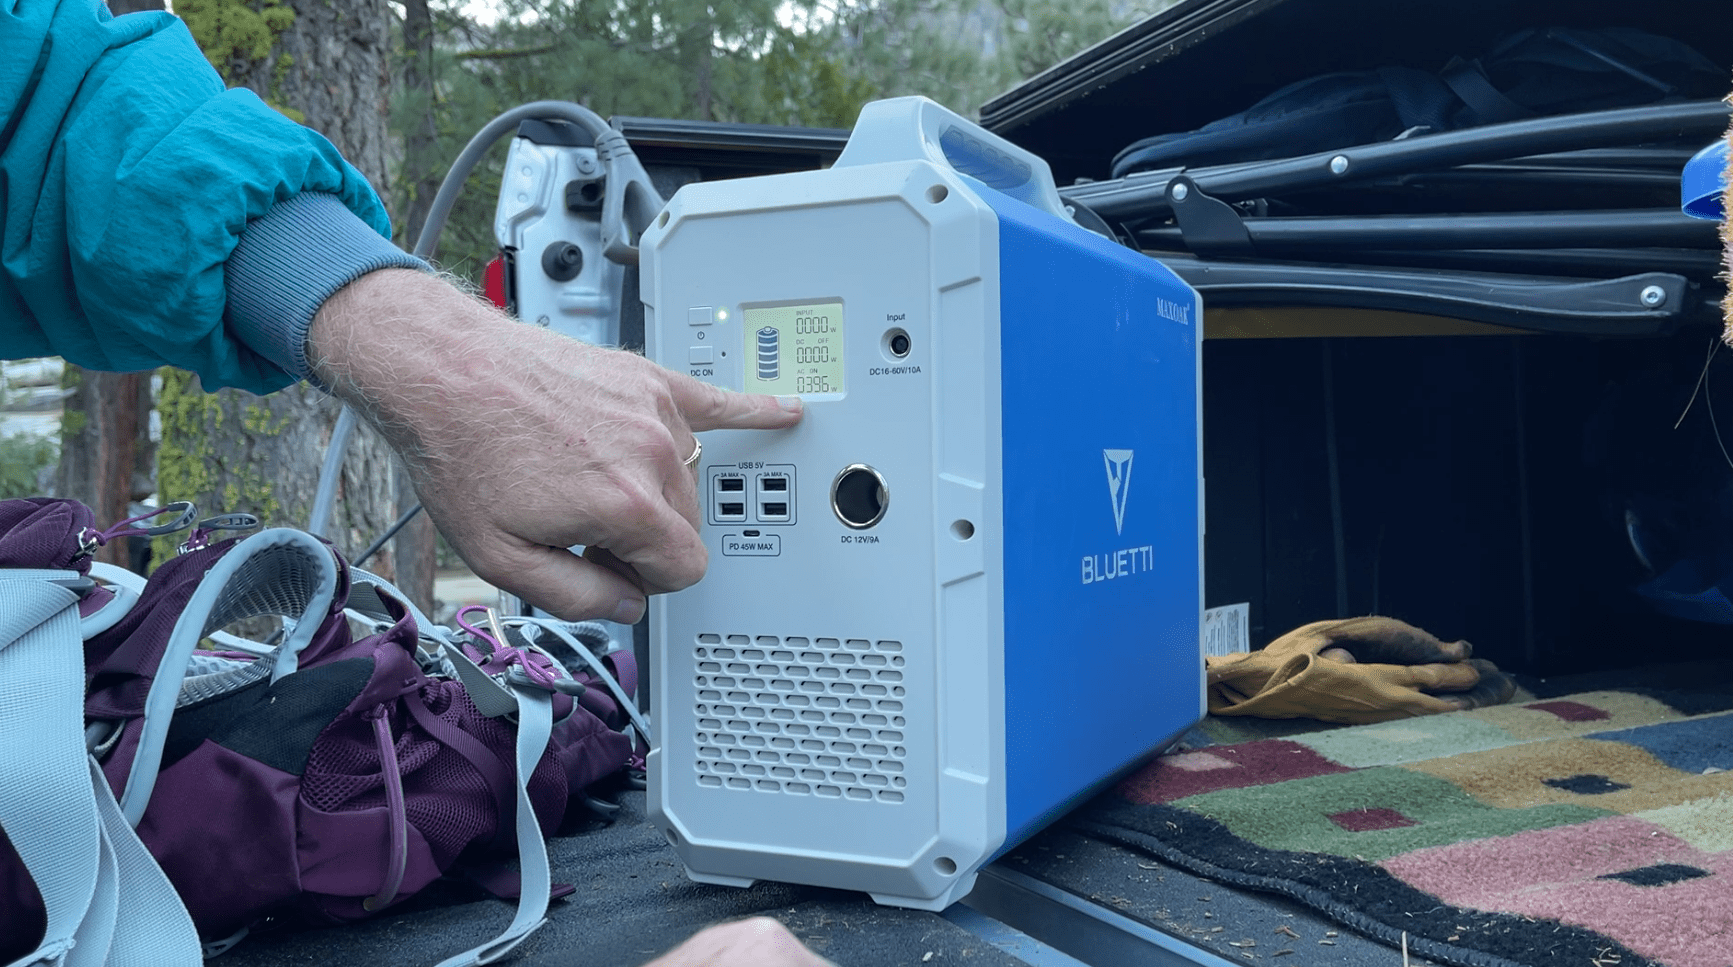 Camping with our Bluetti EB150 portable solar power generator